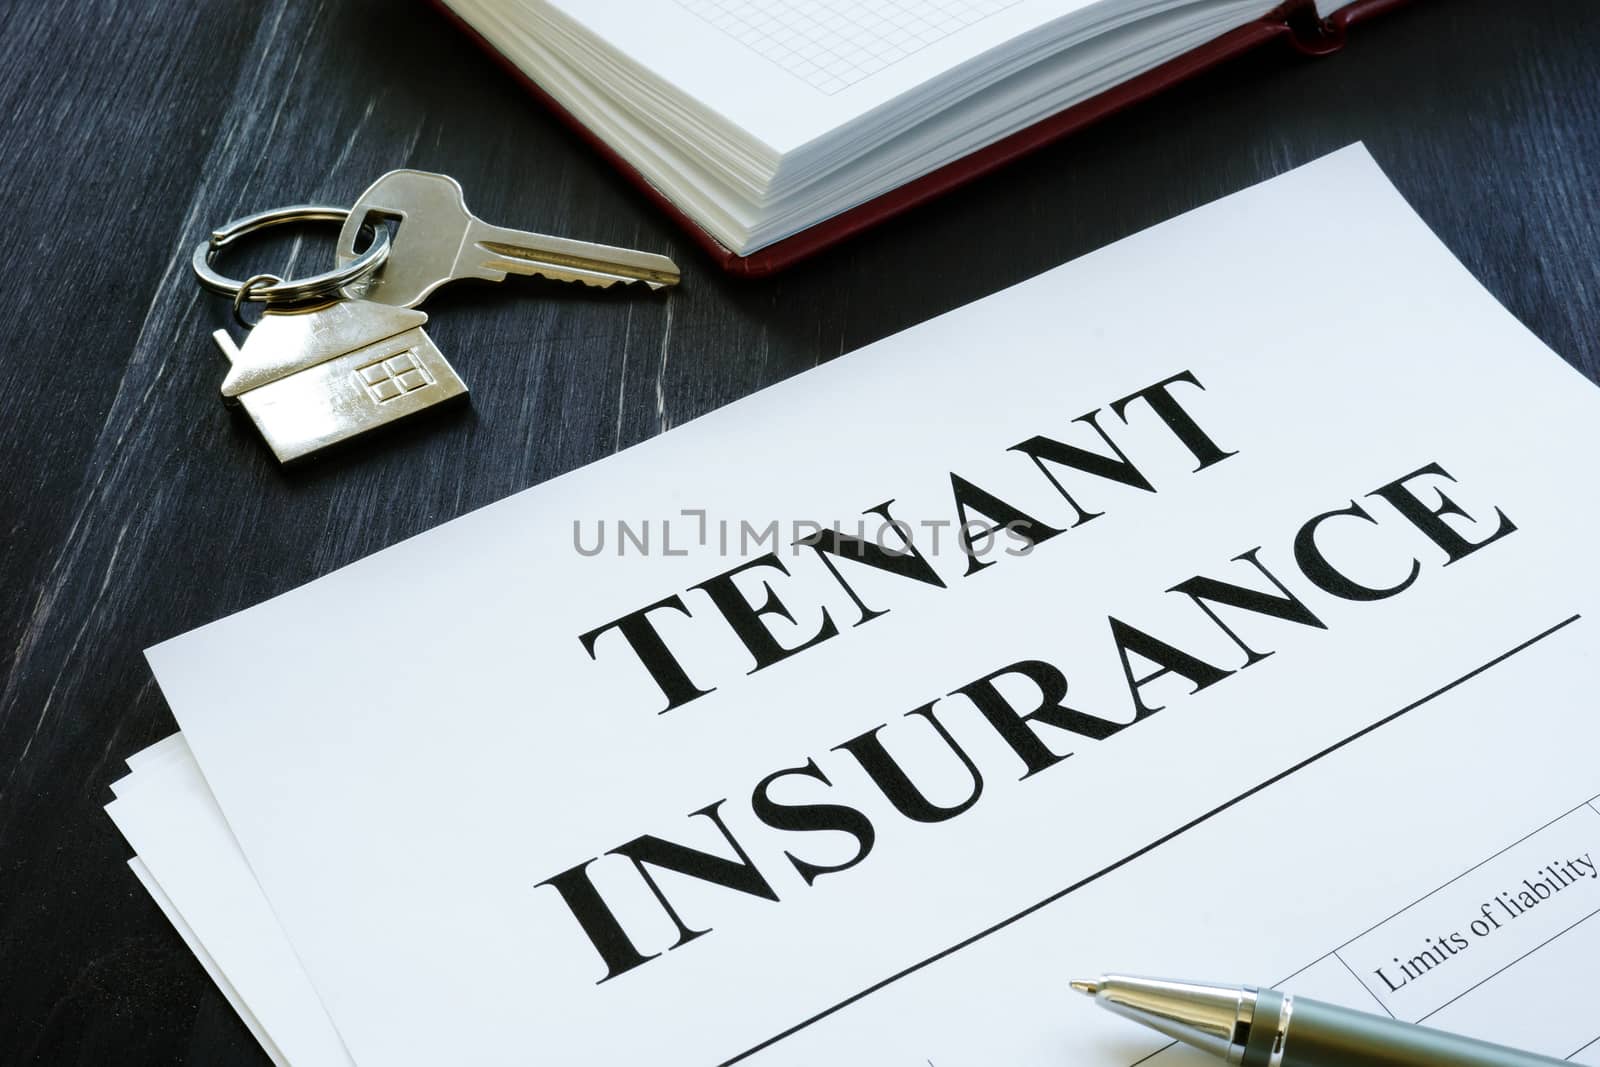 Tenant insurance policy, key and pen for signing. by designer491